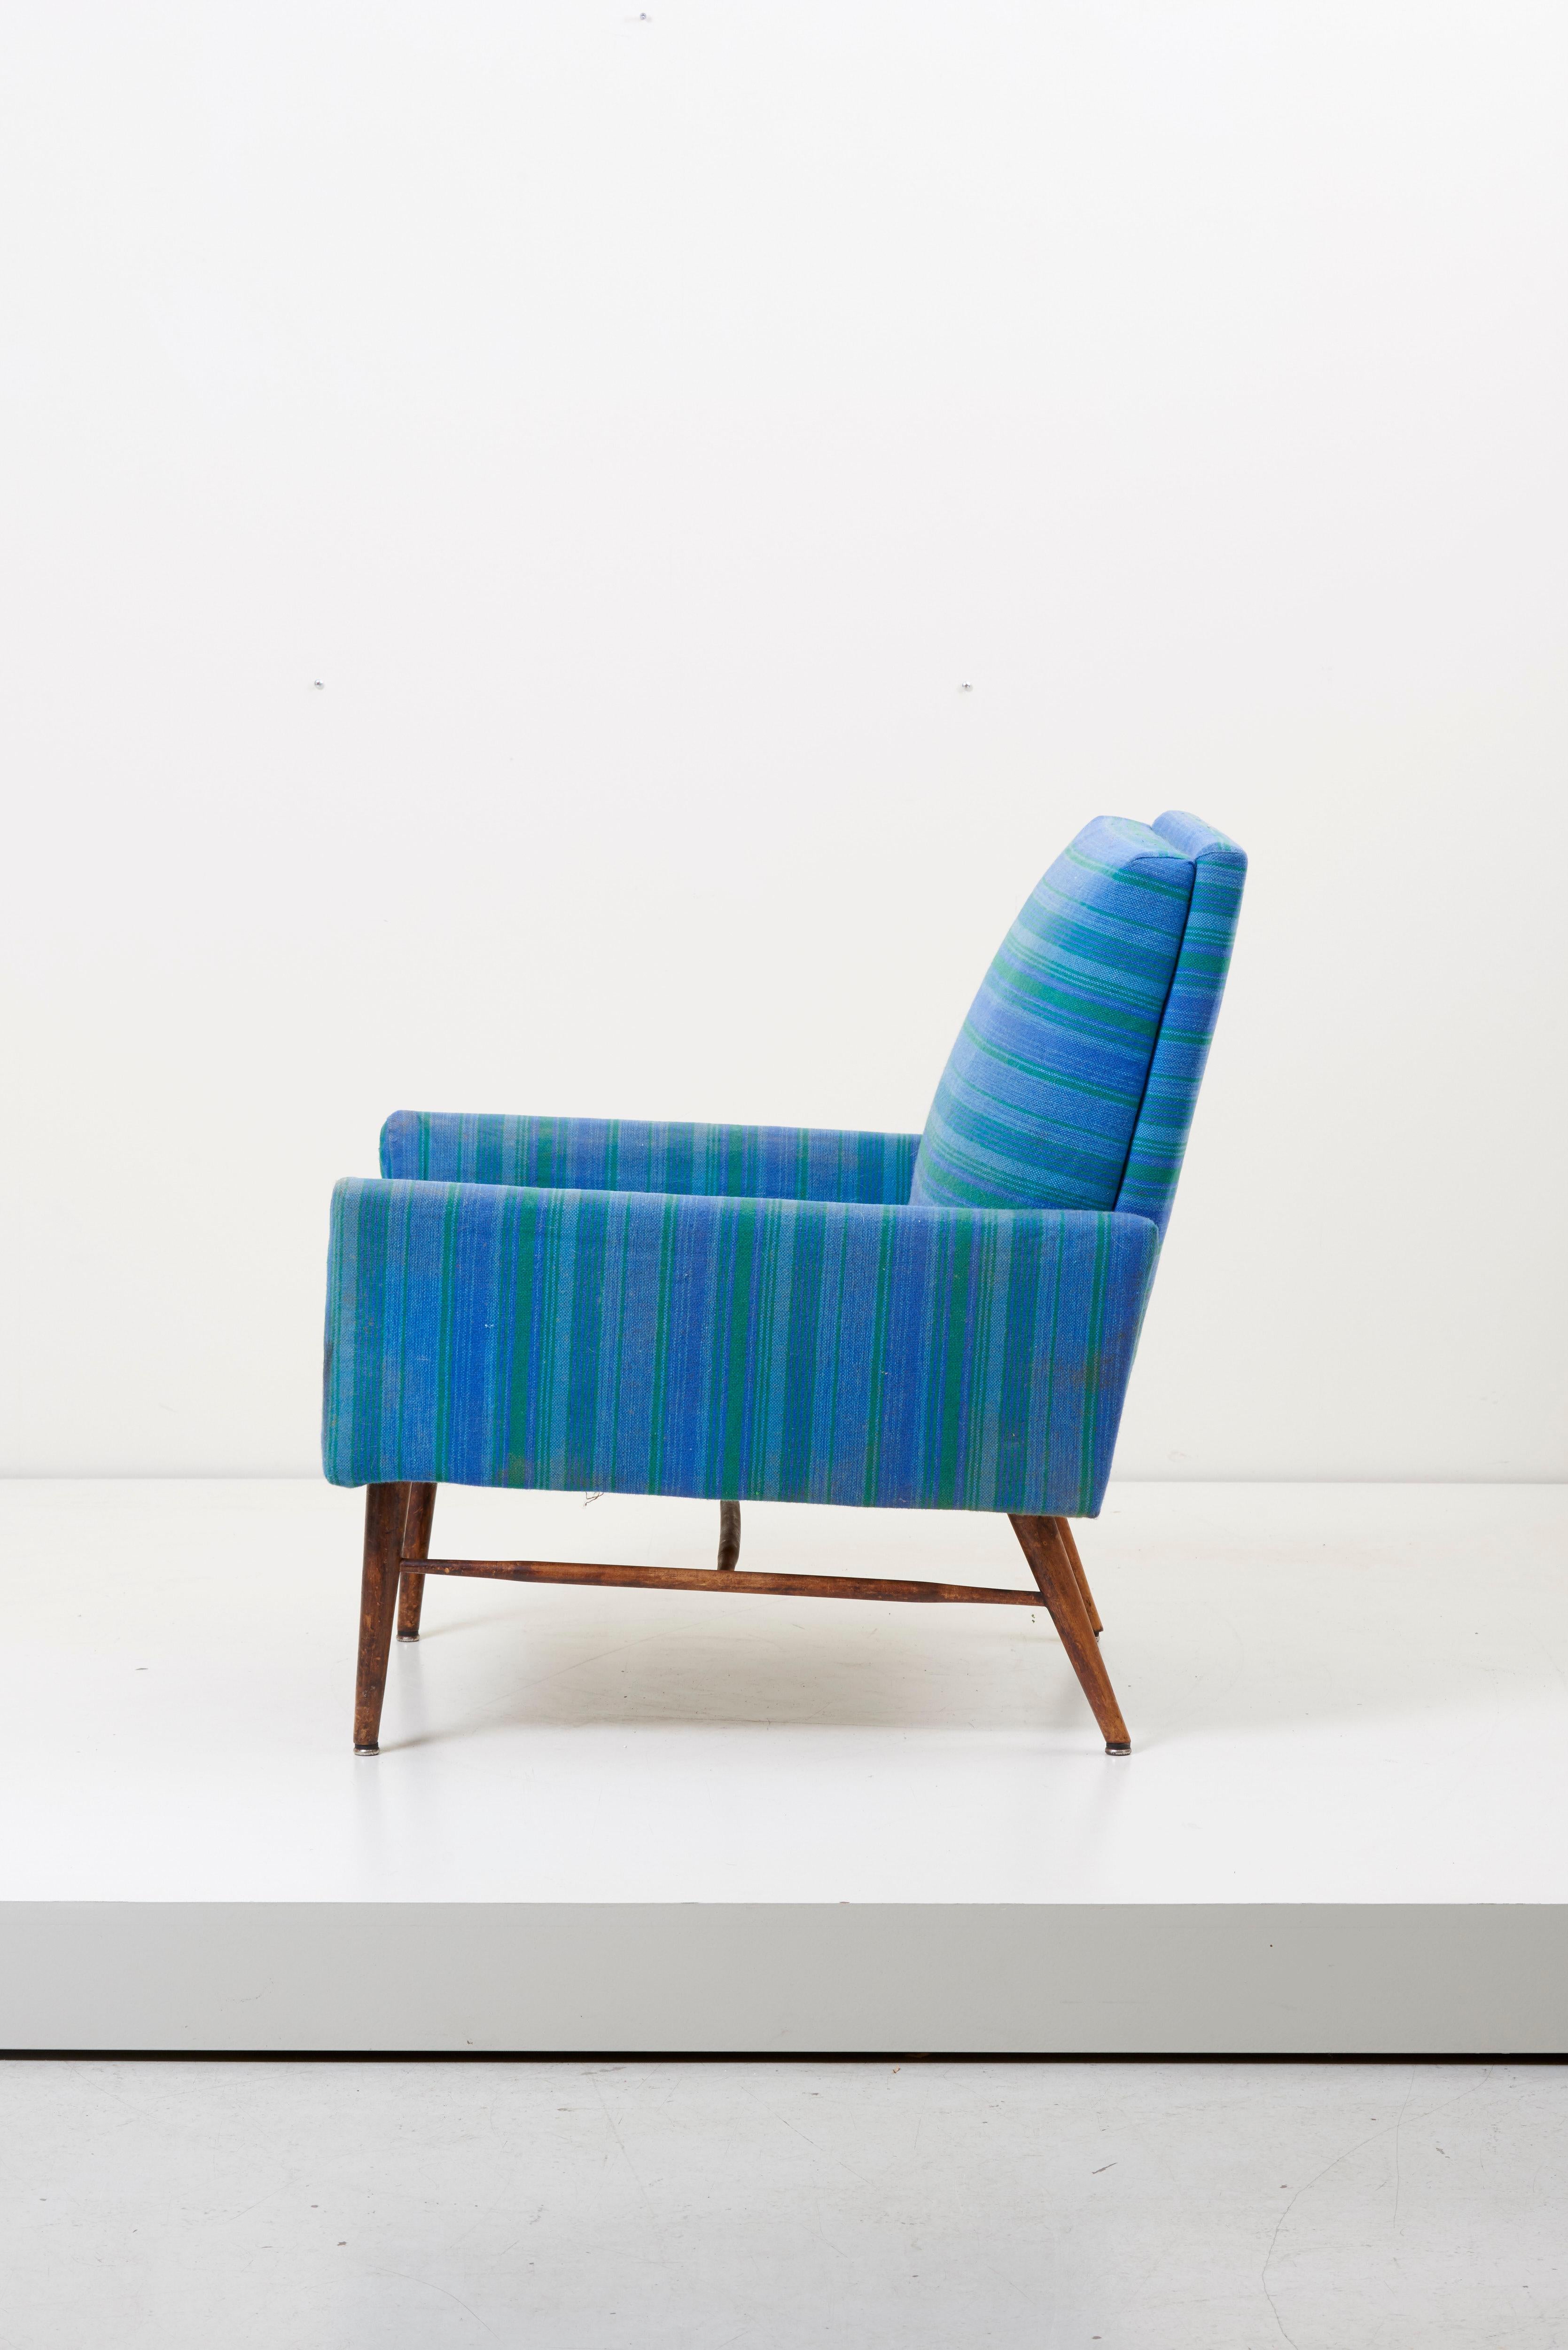 American Vintage Lounge Chair by Paul McCobb for Custom Craft